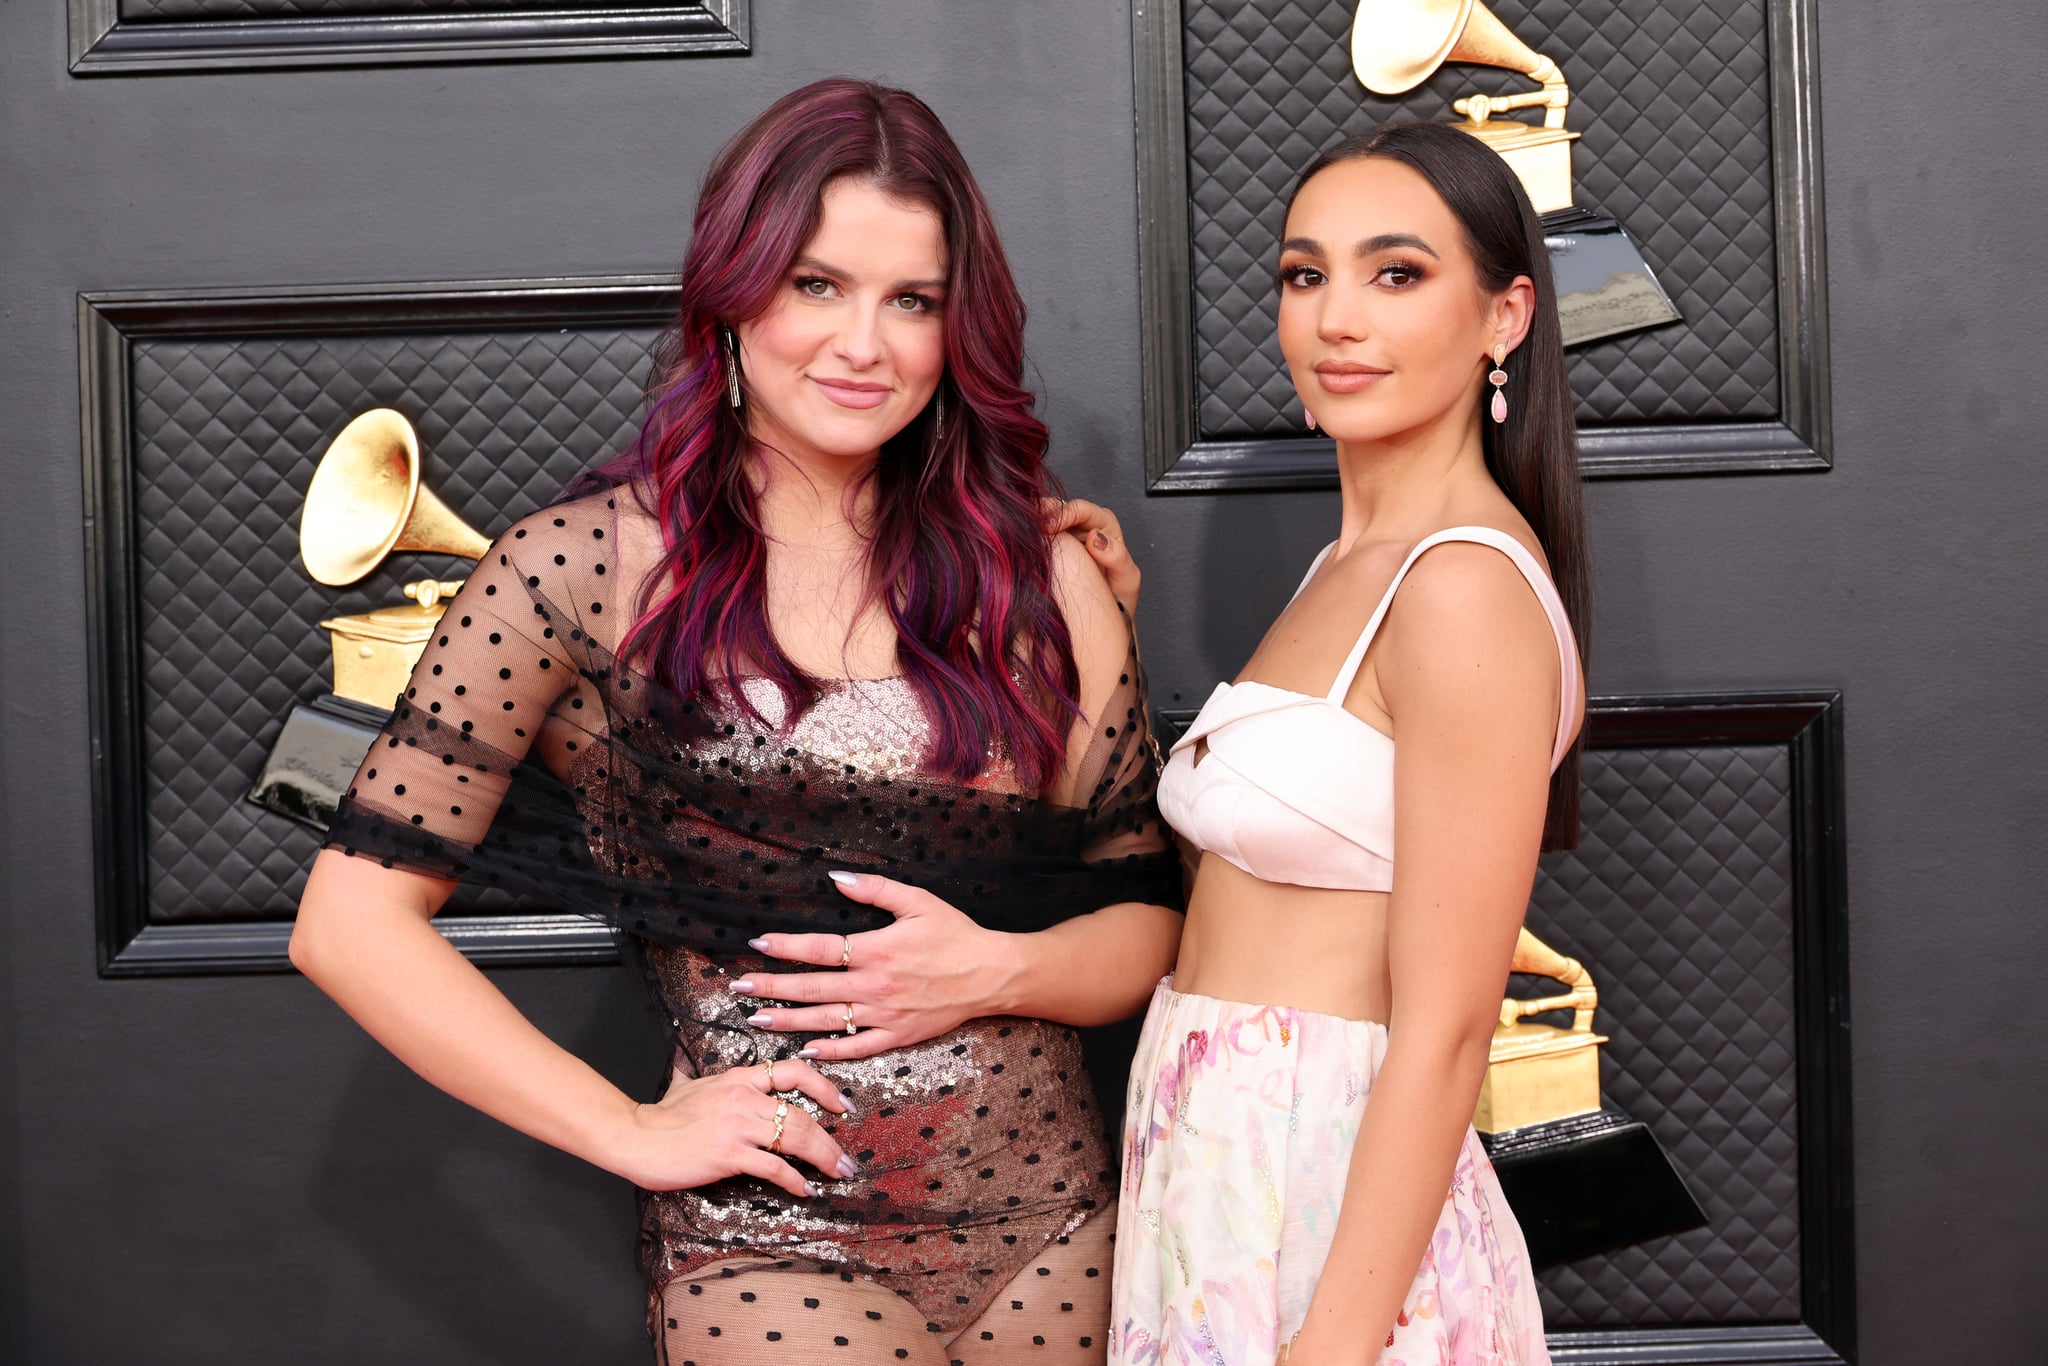 LAS VEGAS, NEVADA - APRIL 03: Abigail Barlow and Emily Bear attend the 64th Annual GRAMMY Awards at MGM Grand Garden Arena on April 03, 2022 in Las Vegas, Nevada. (Photo by Amy Sussman/Getty Images)